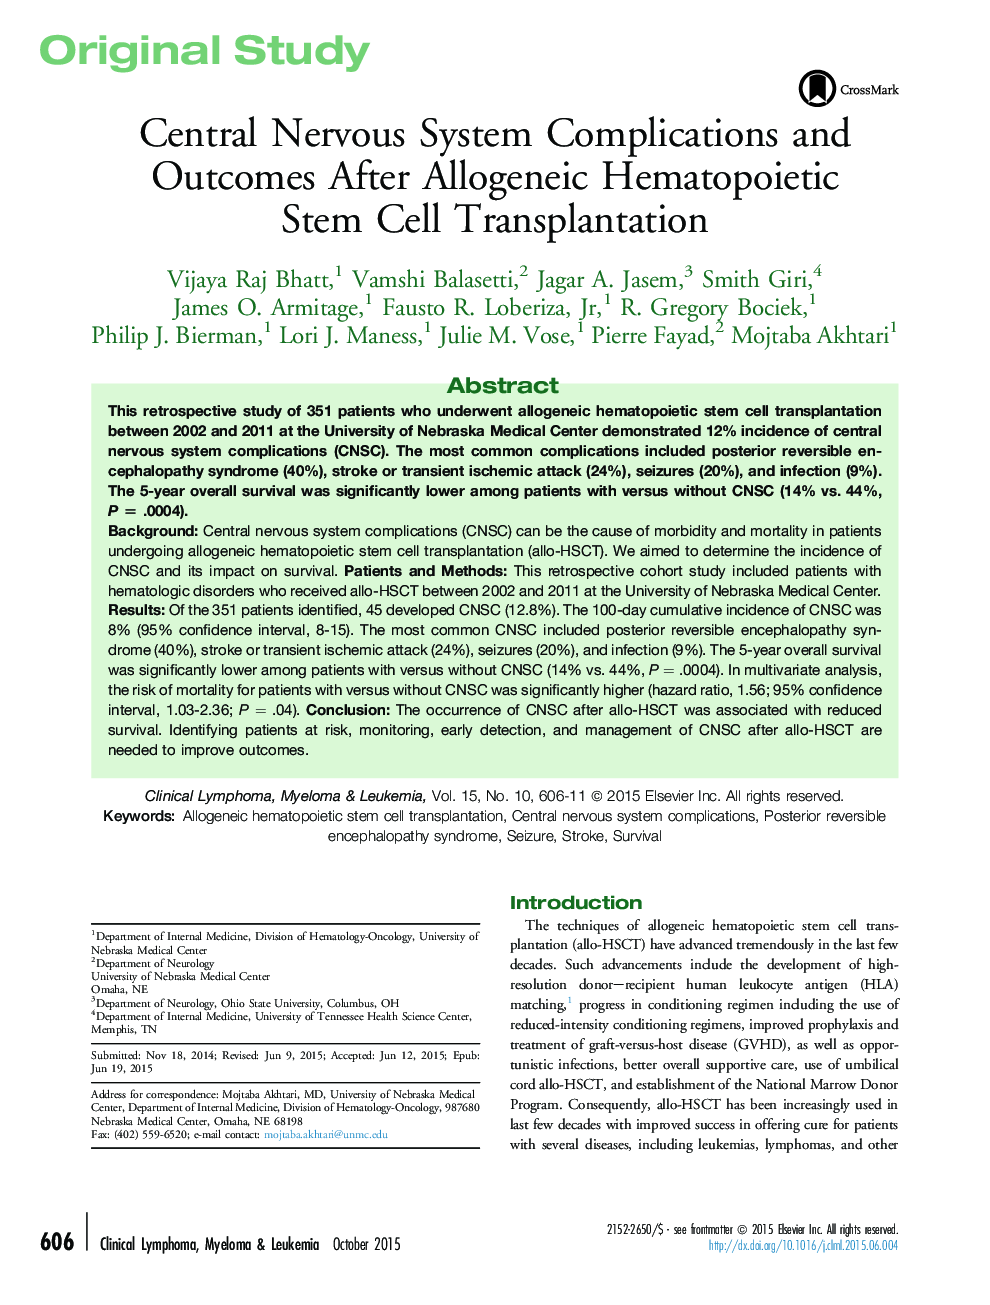 Original StudyCentral Nervous System Complications and Outcomes After Allogeneic Hematopoietic Stem Cell Transplantation